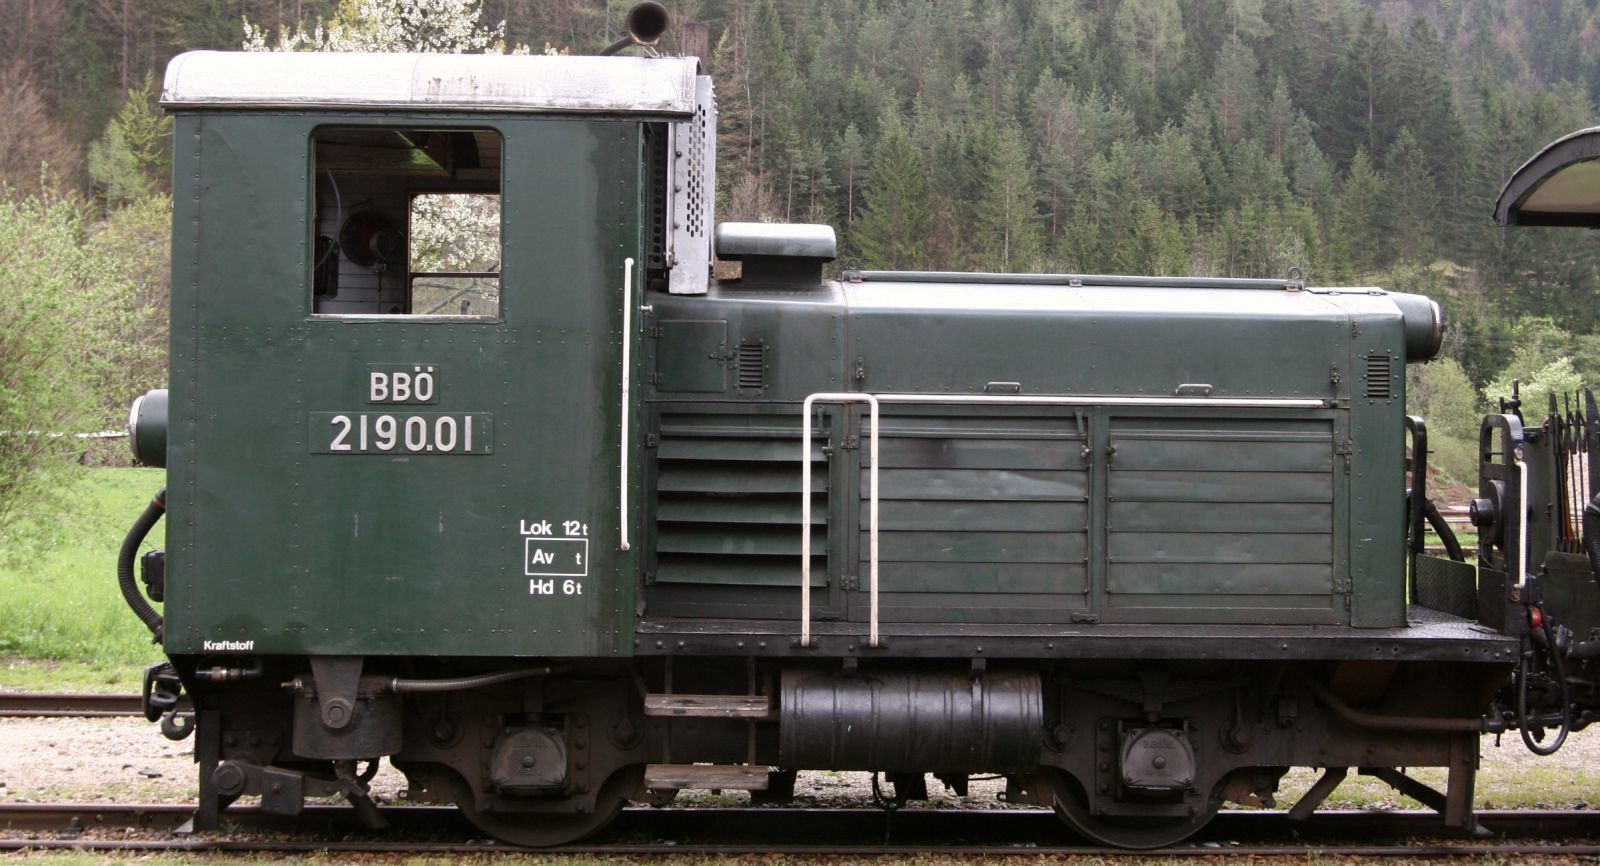 2190.01 in May 1995 in Lunz am See